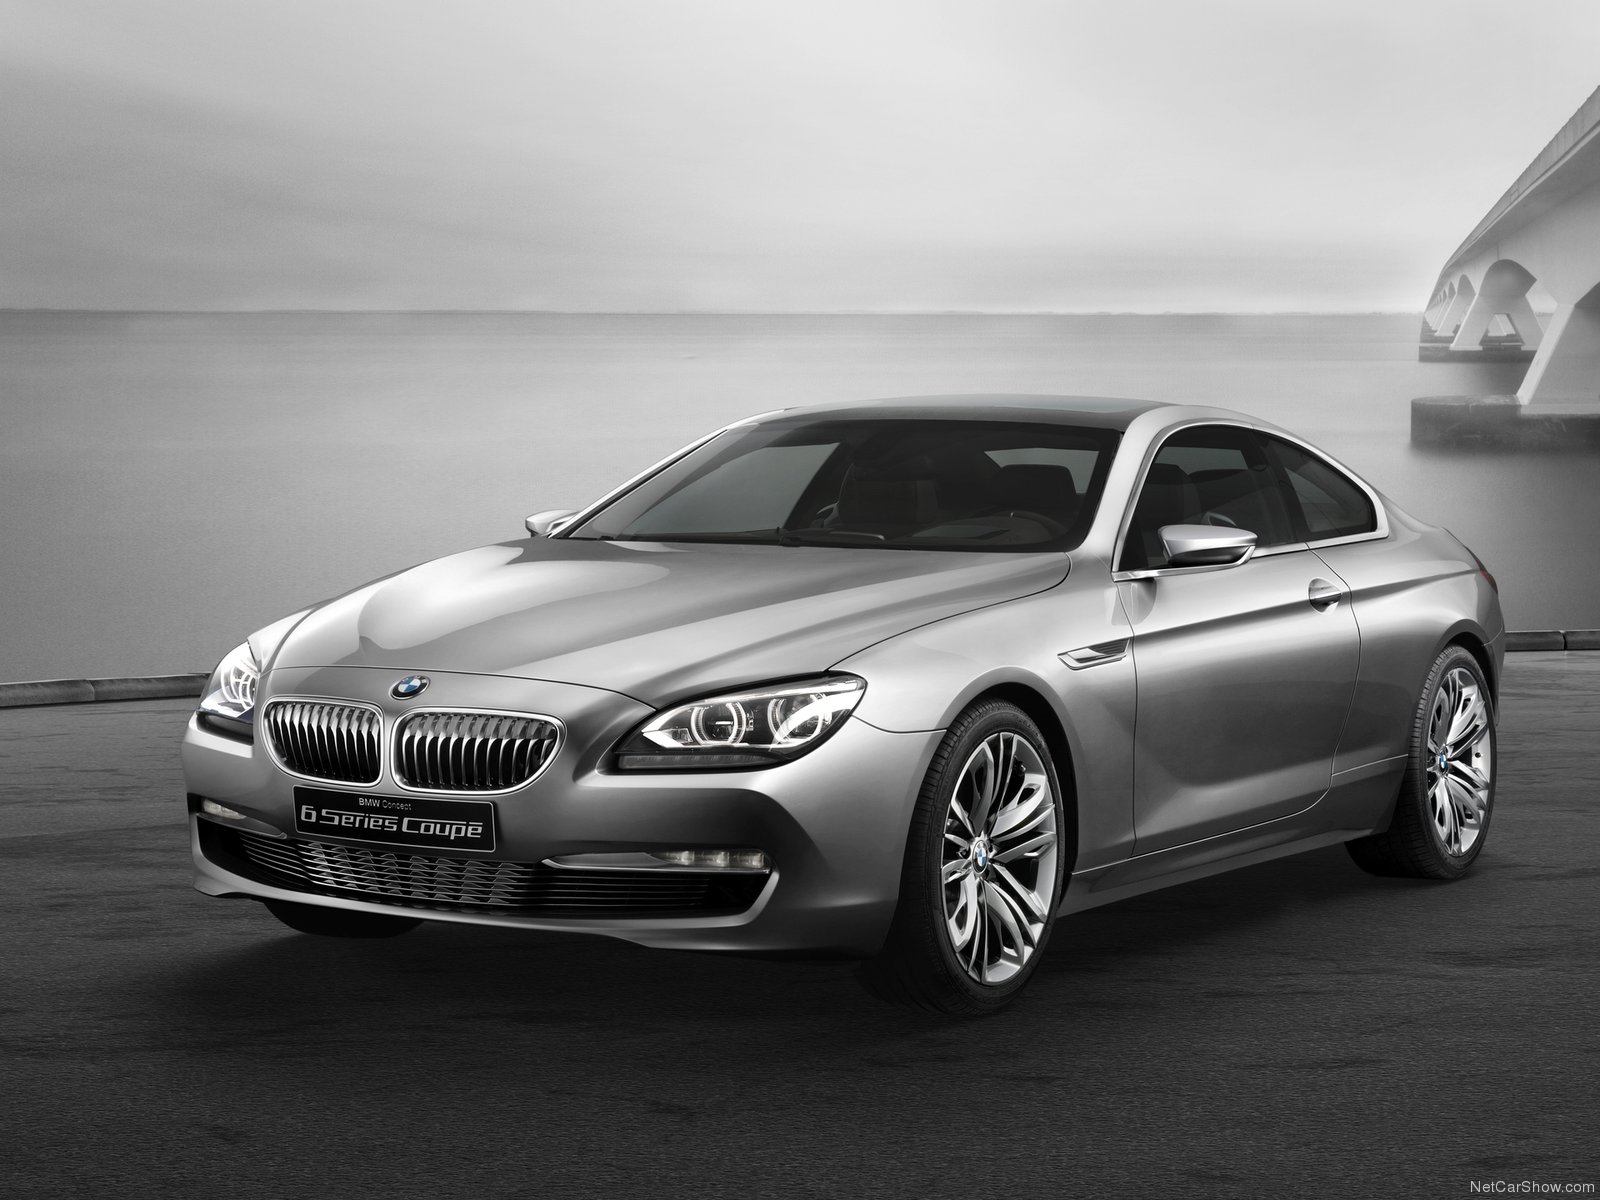 bmw, 6 series, Coupe, Concept, 2010 Wallpaper